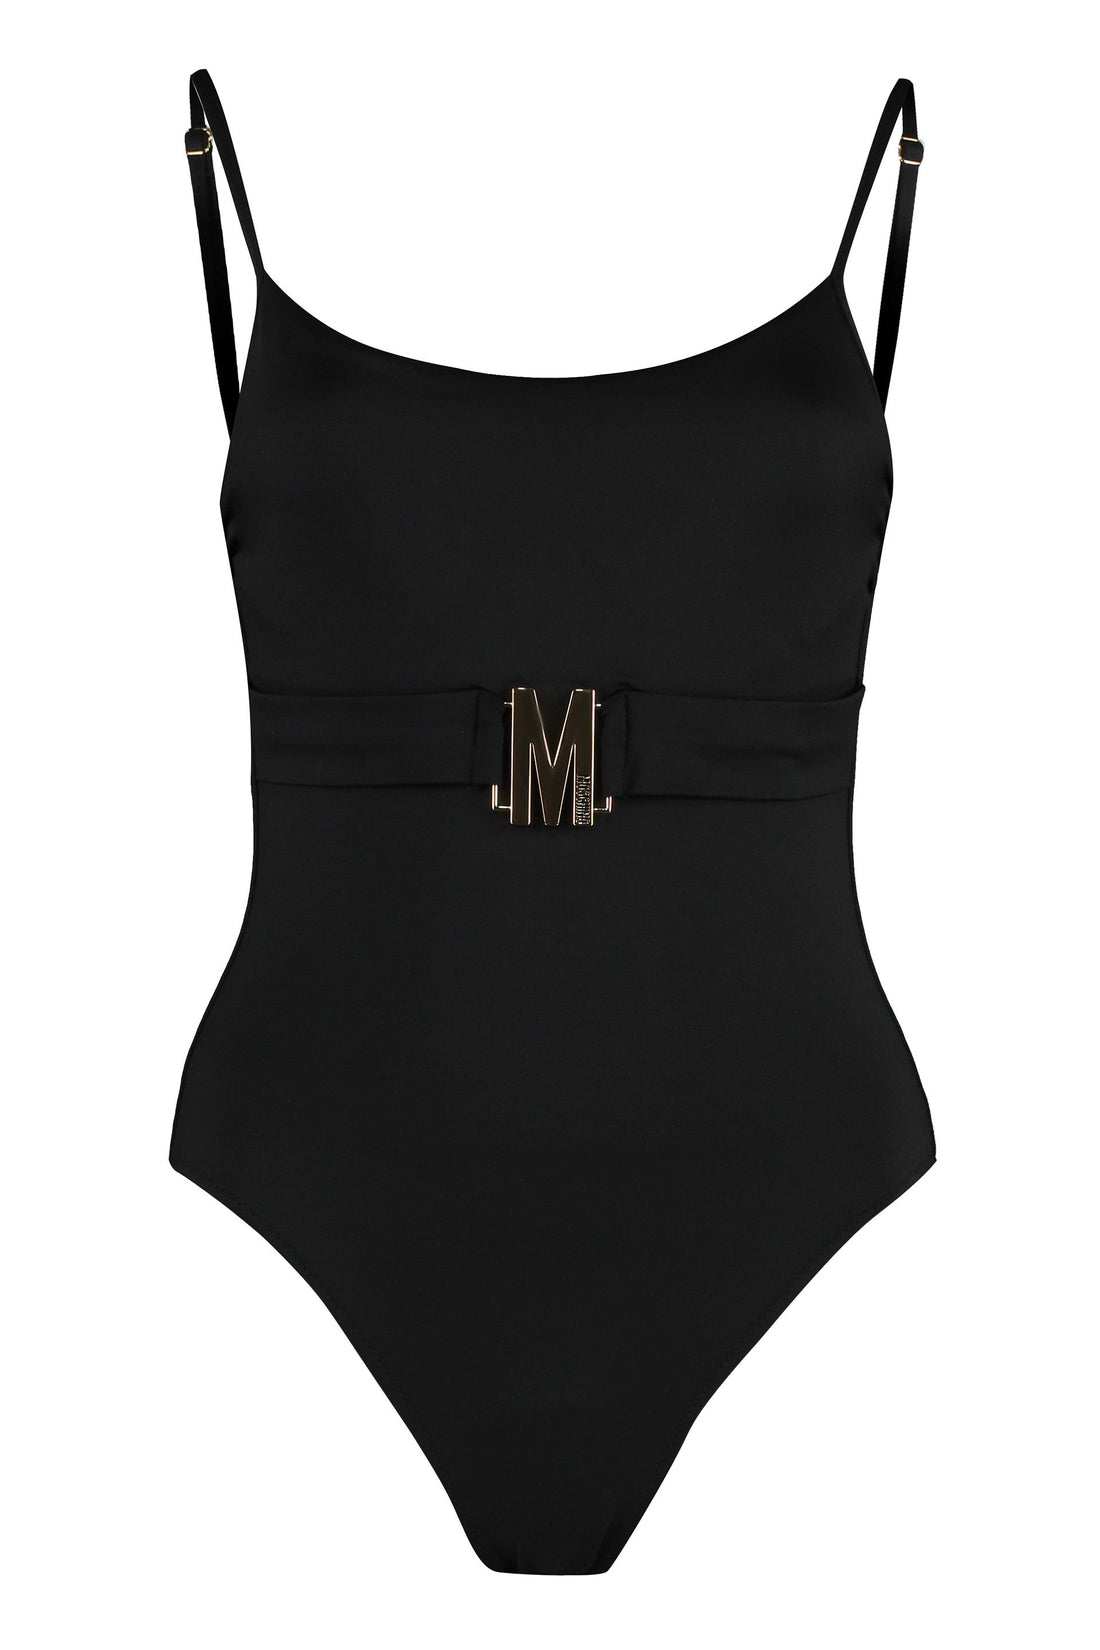 Moschino-OUTLET-SALE-One-piece swimsuit with logo-ARCHIVIST